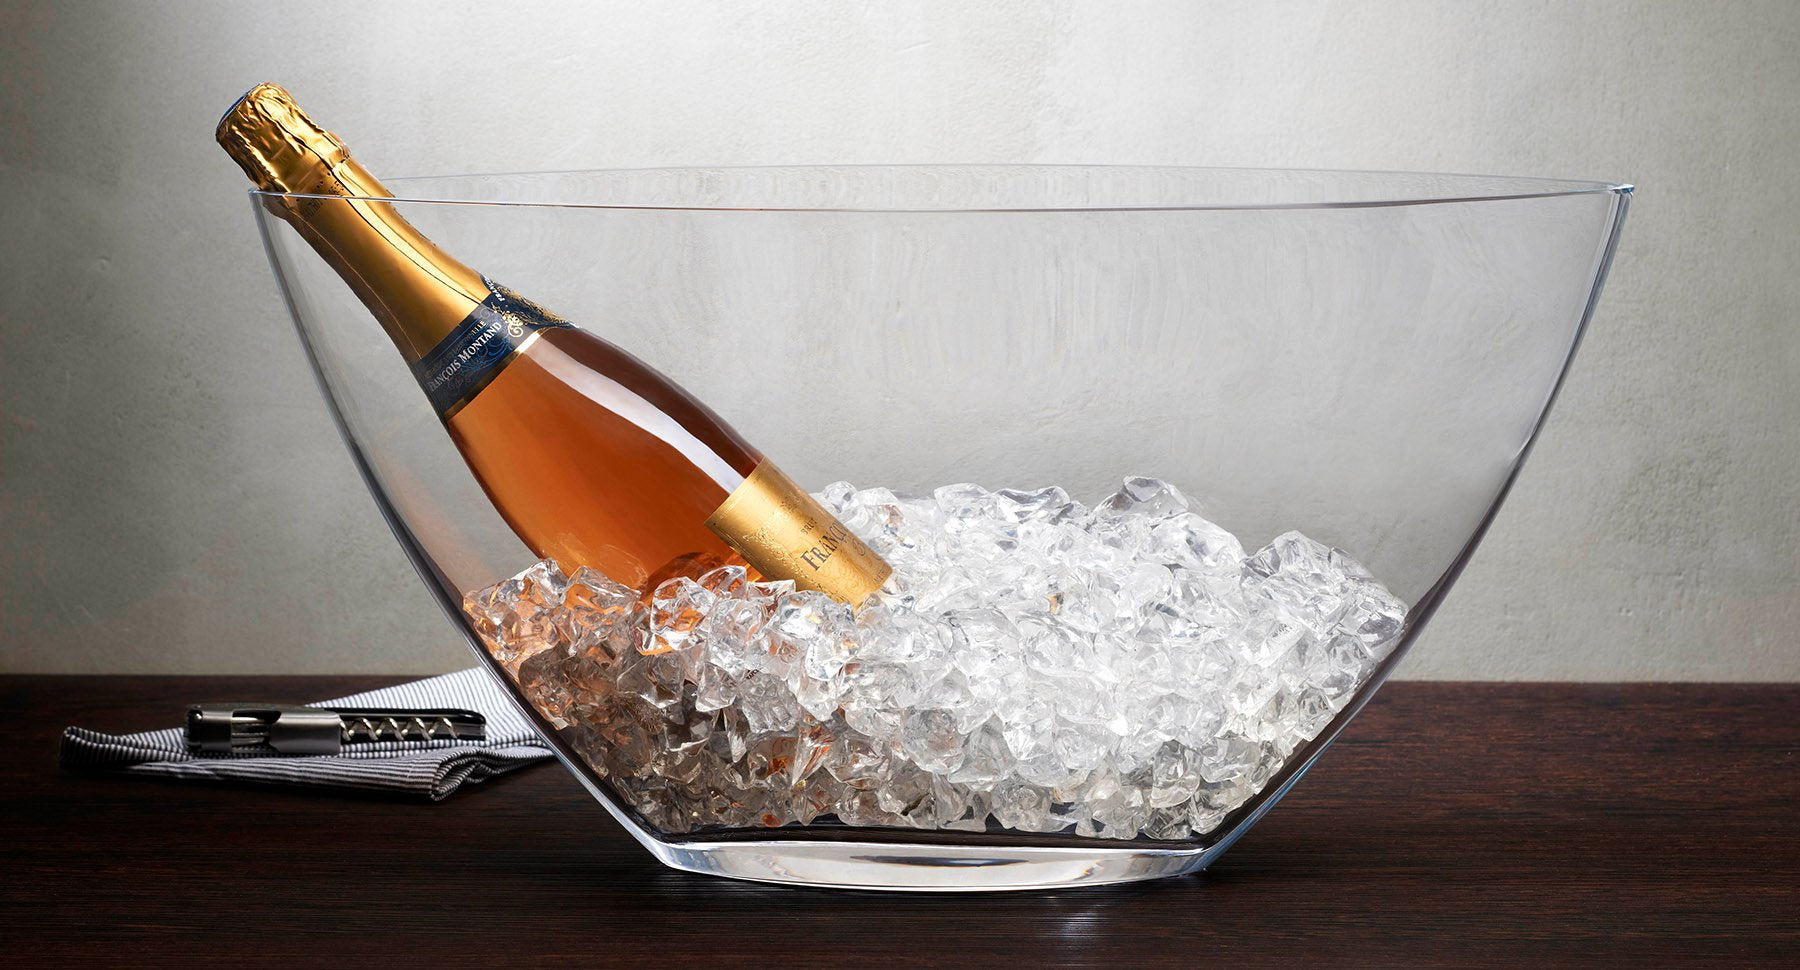 Champagne Bottle In Ice Bucket Candle Holder - Party Favor